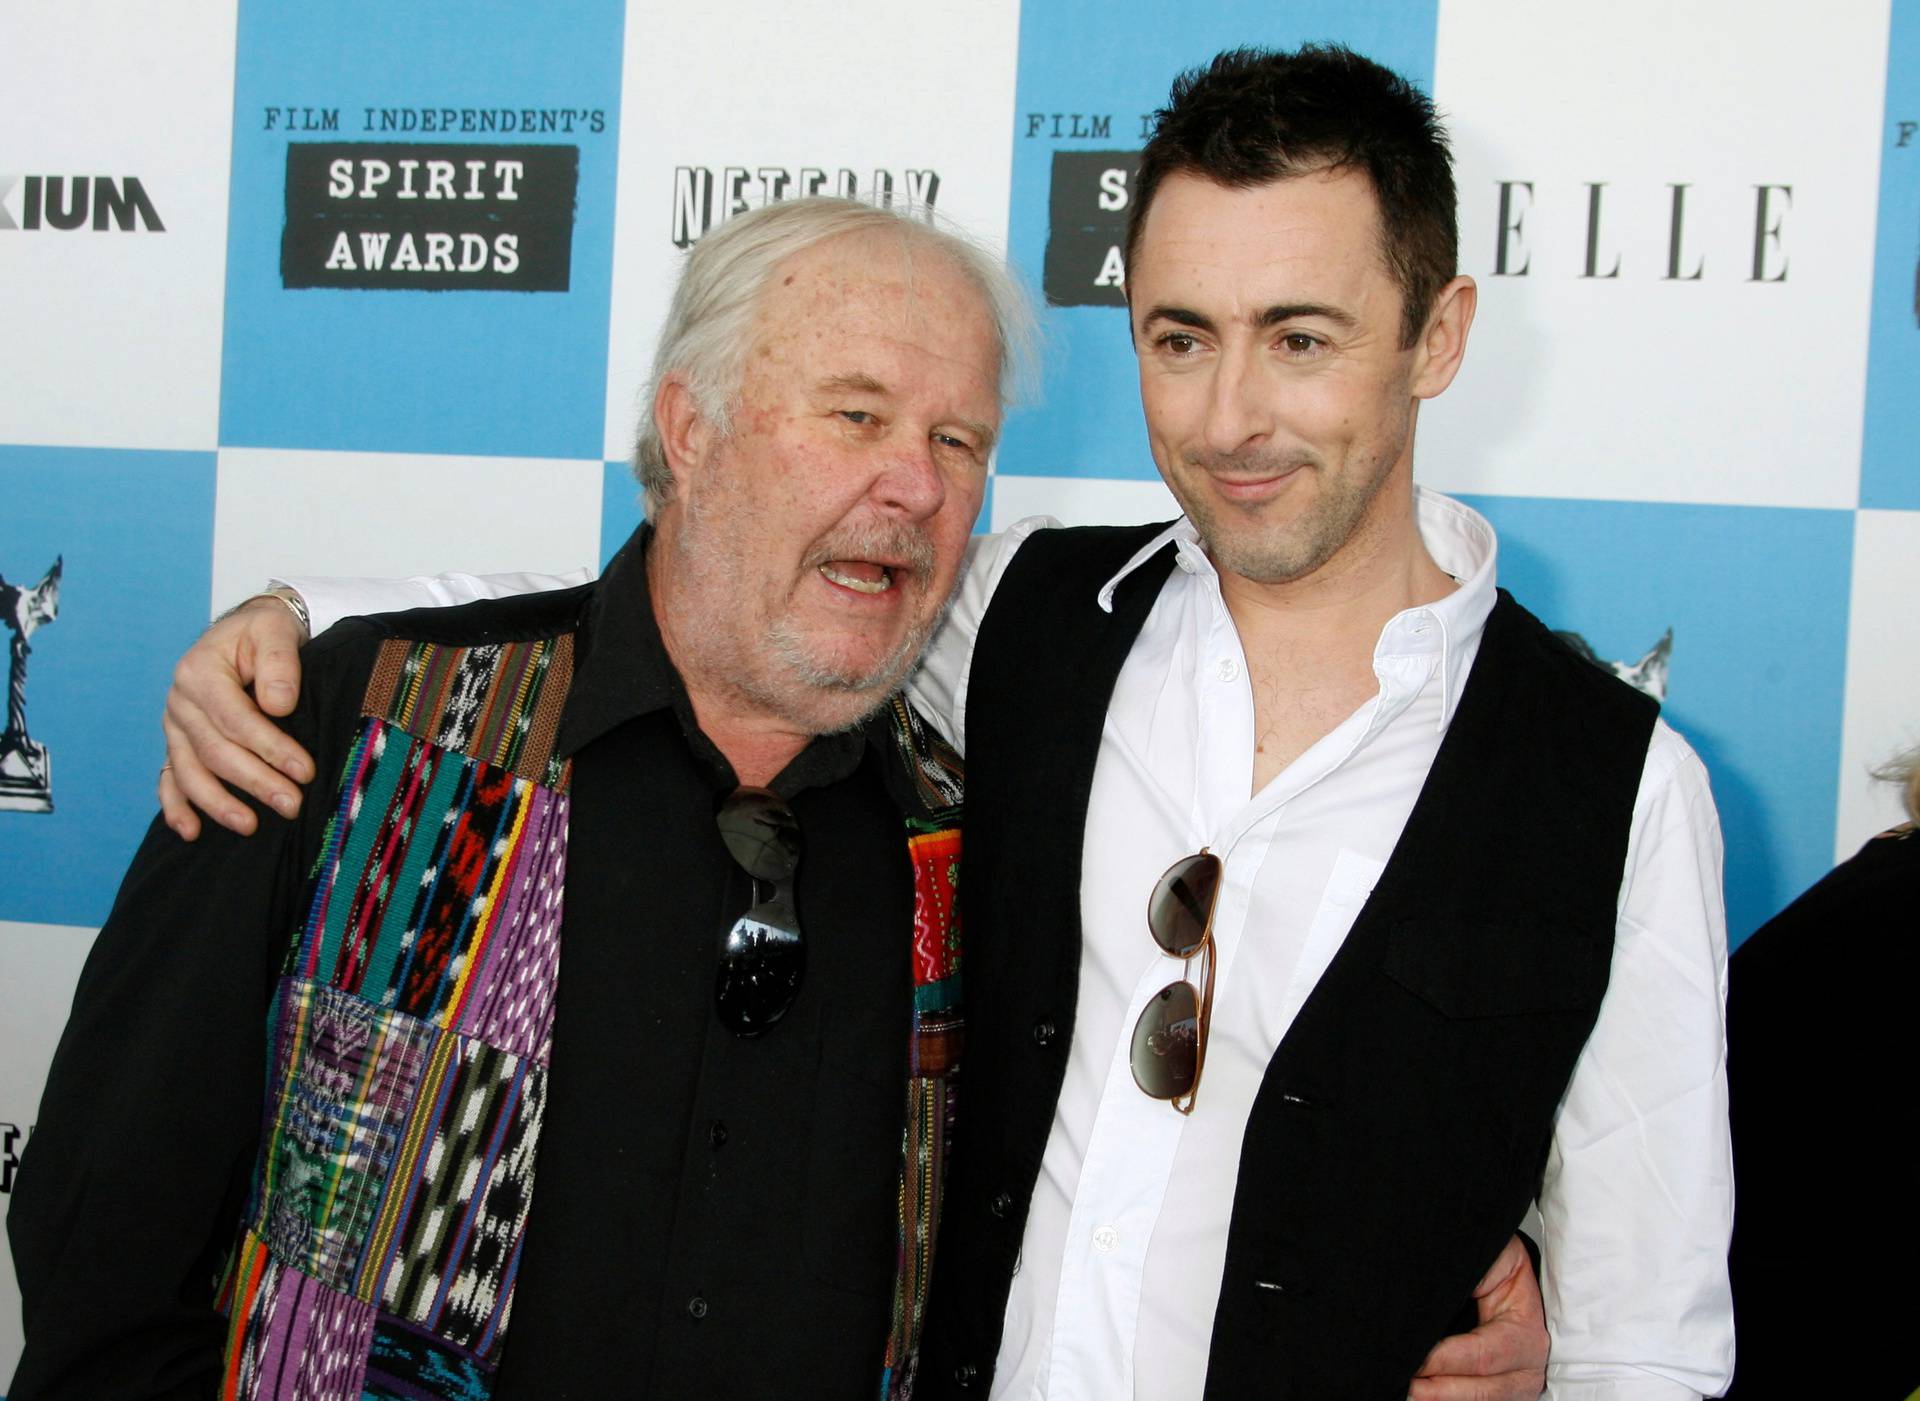 FILE PHOTO: Actors Ned Beatty and Alan Cumming arrive at Film Independent's Spirit Awards in Santa Monica